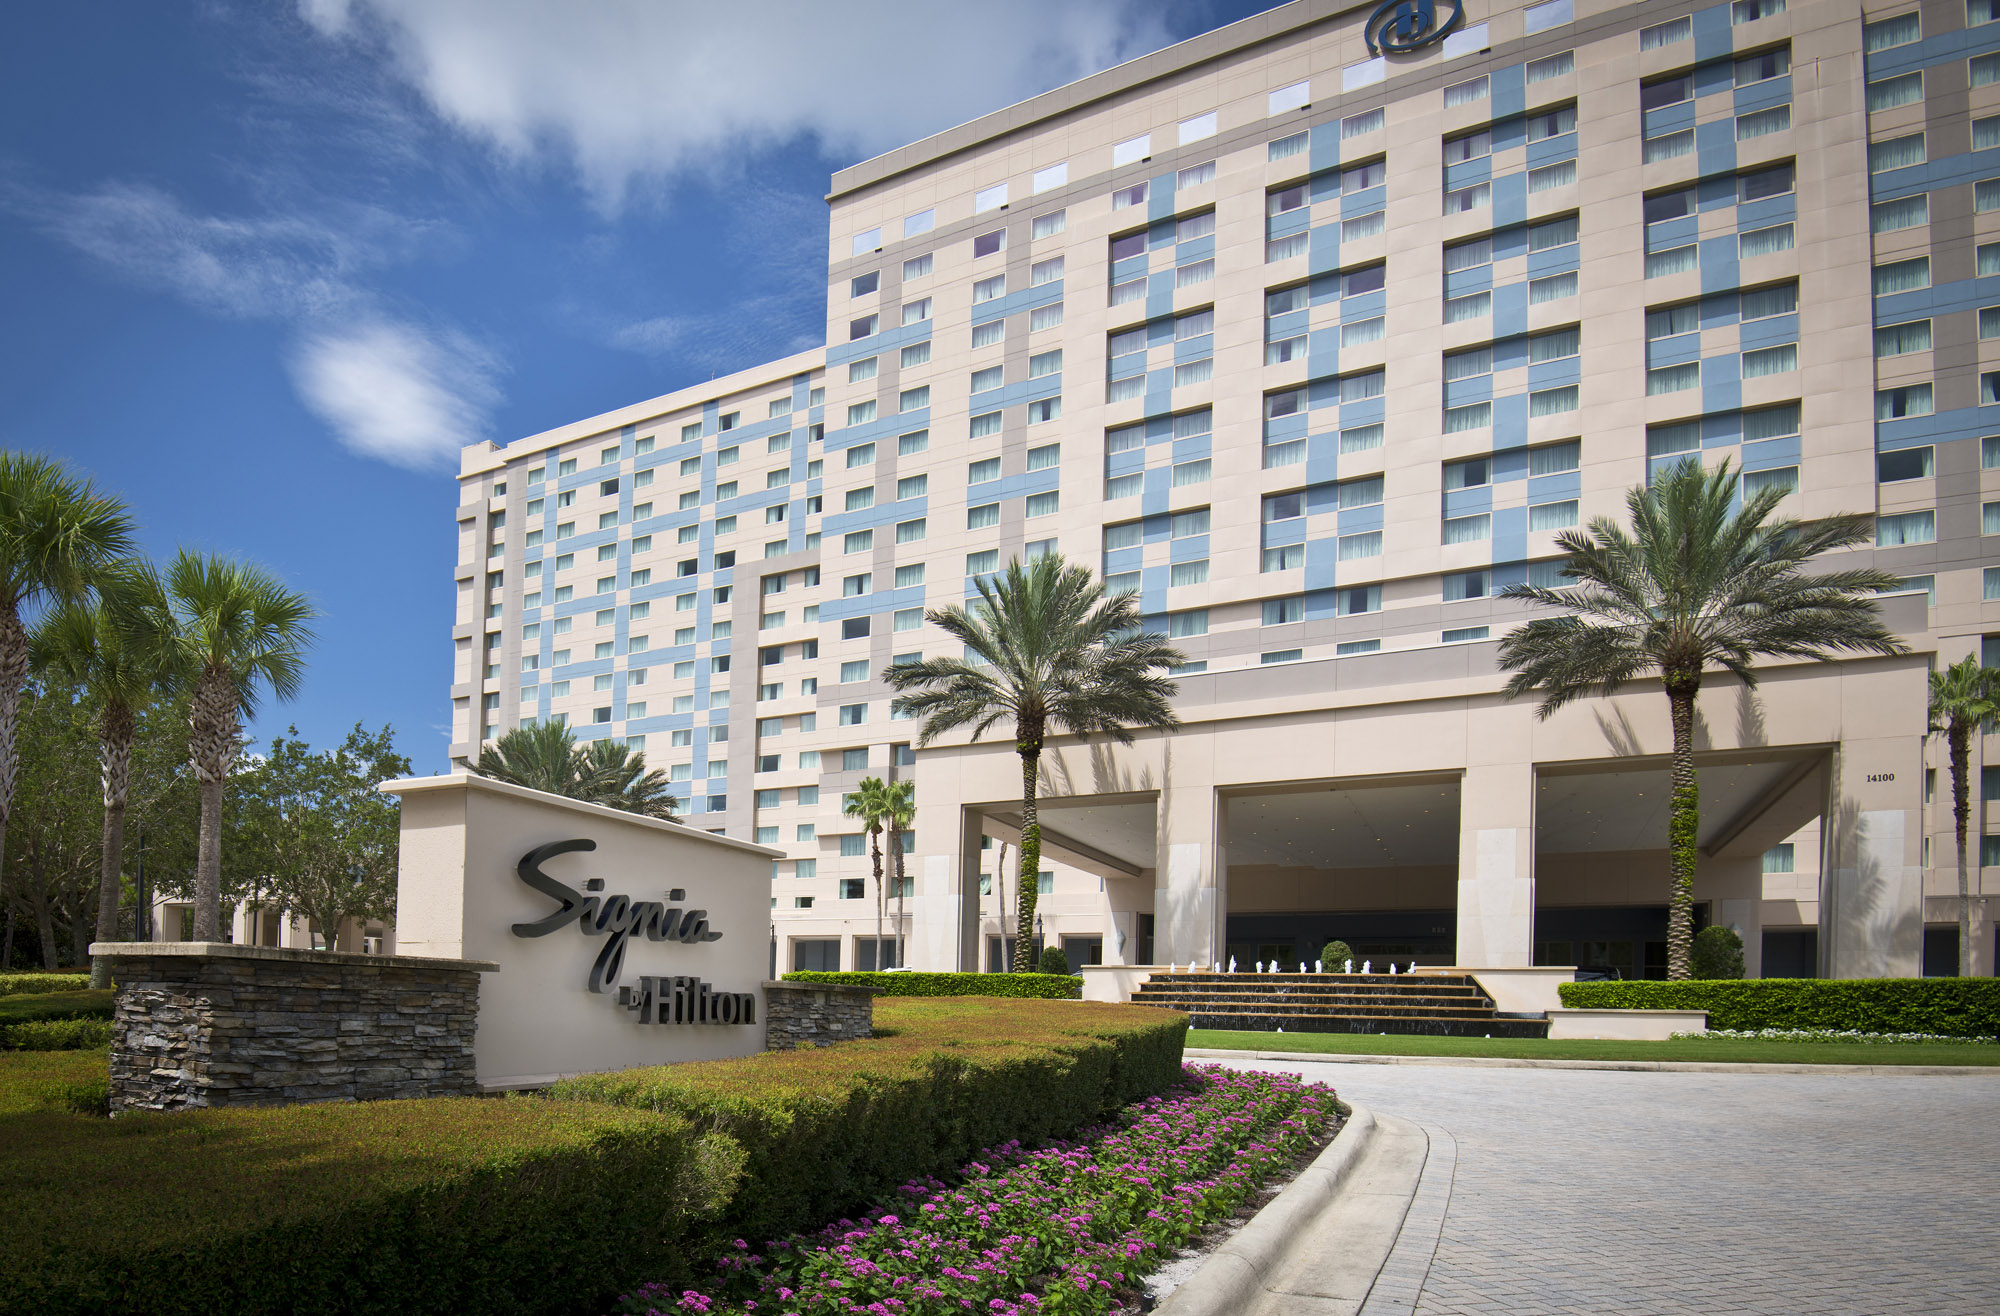 Exterior driveway and signage of Signia by Hilton Orlando